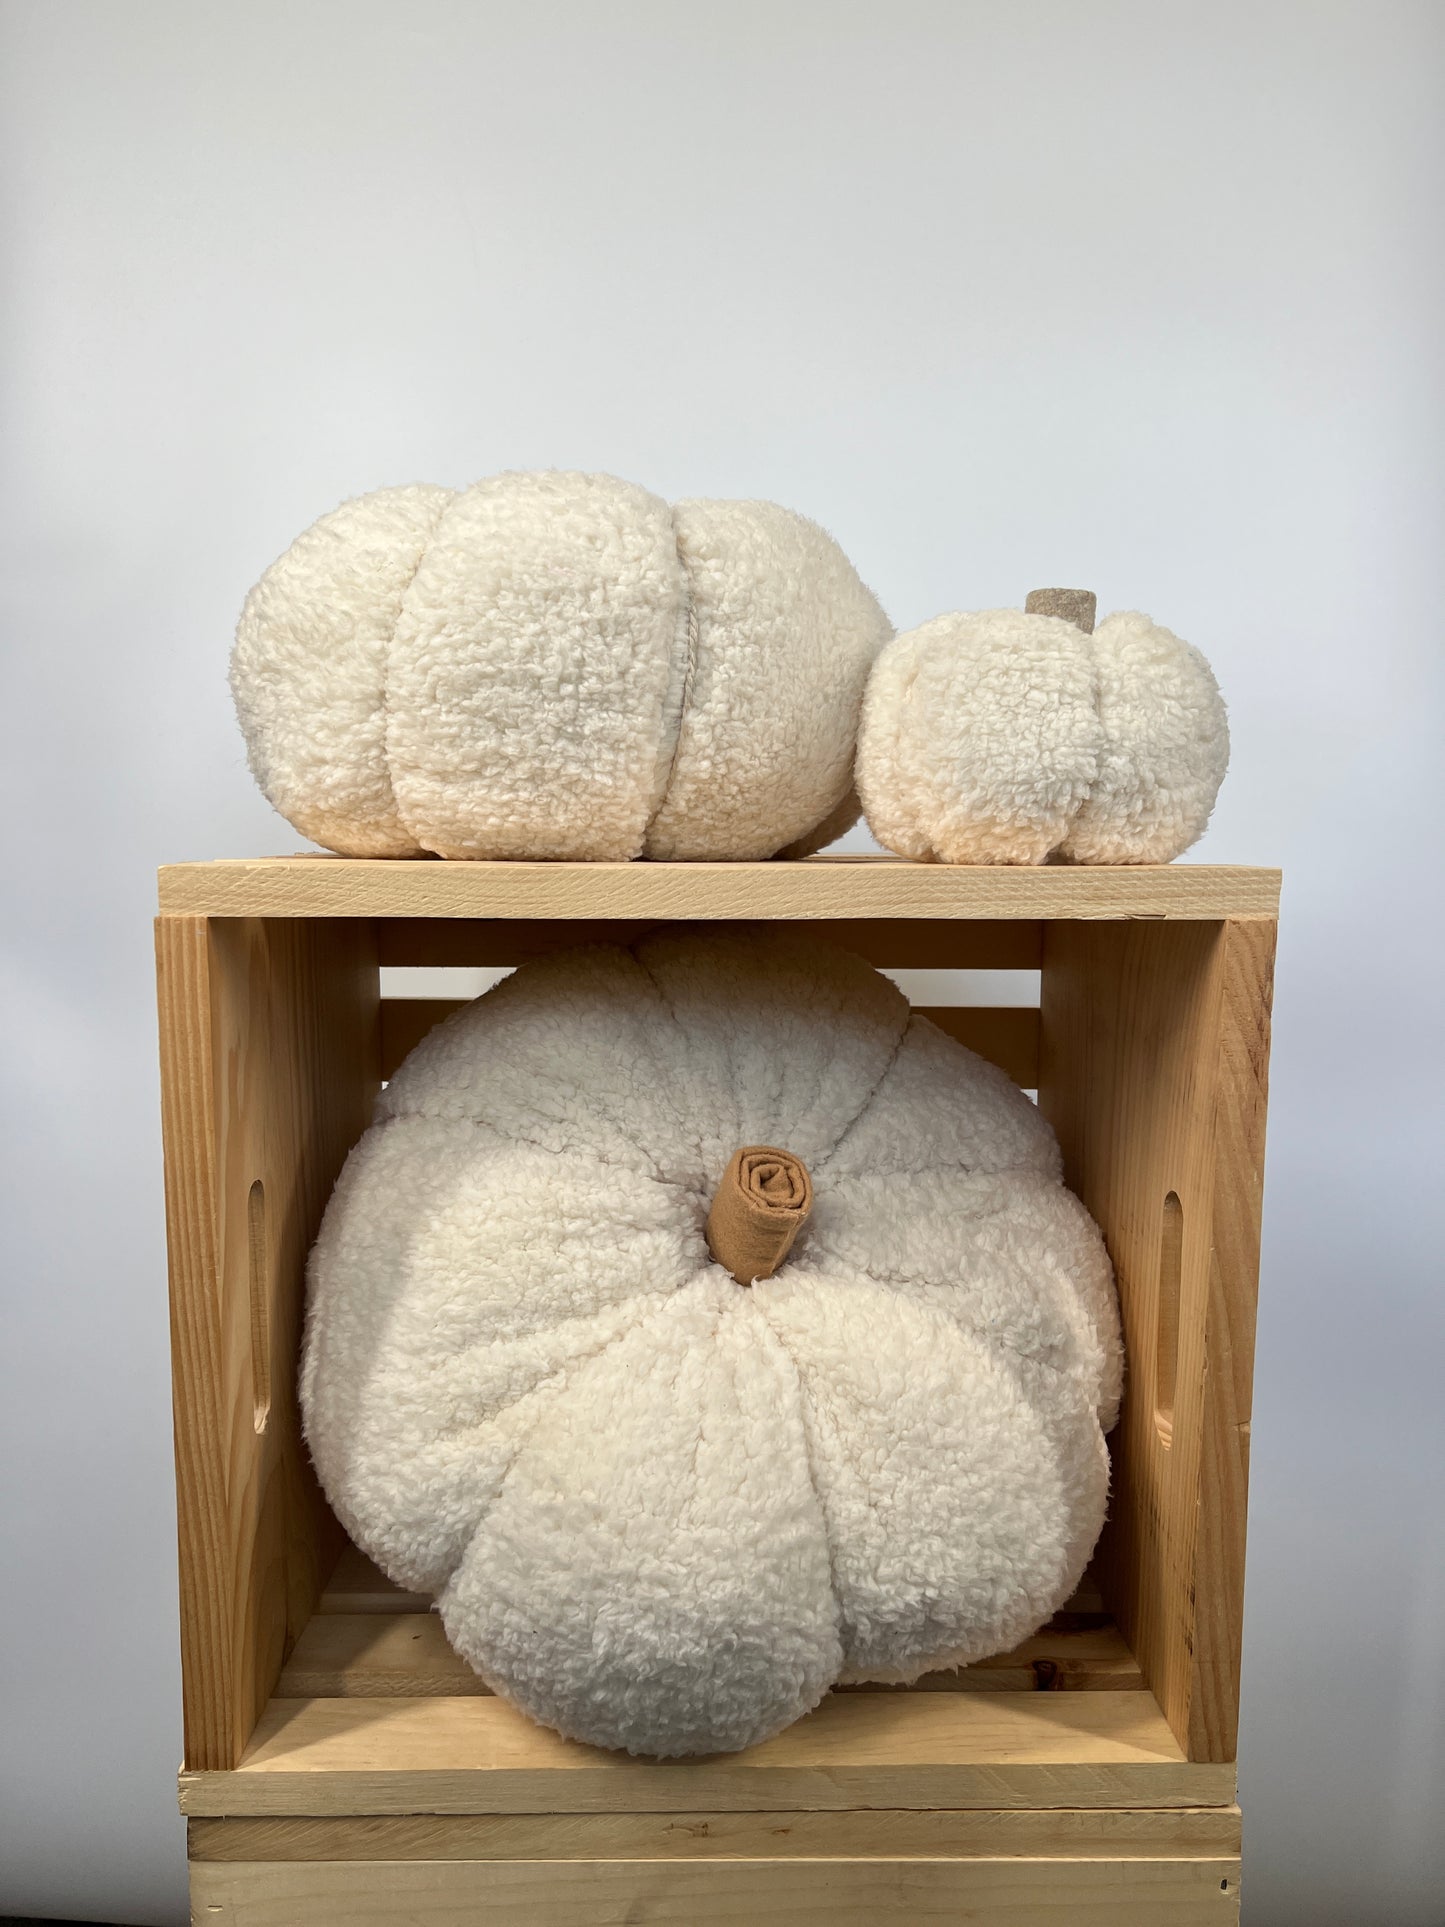 Sherpa pumpkins in ivory color